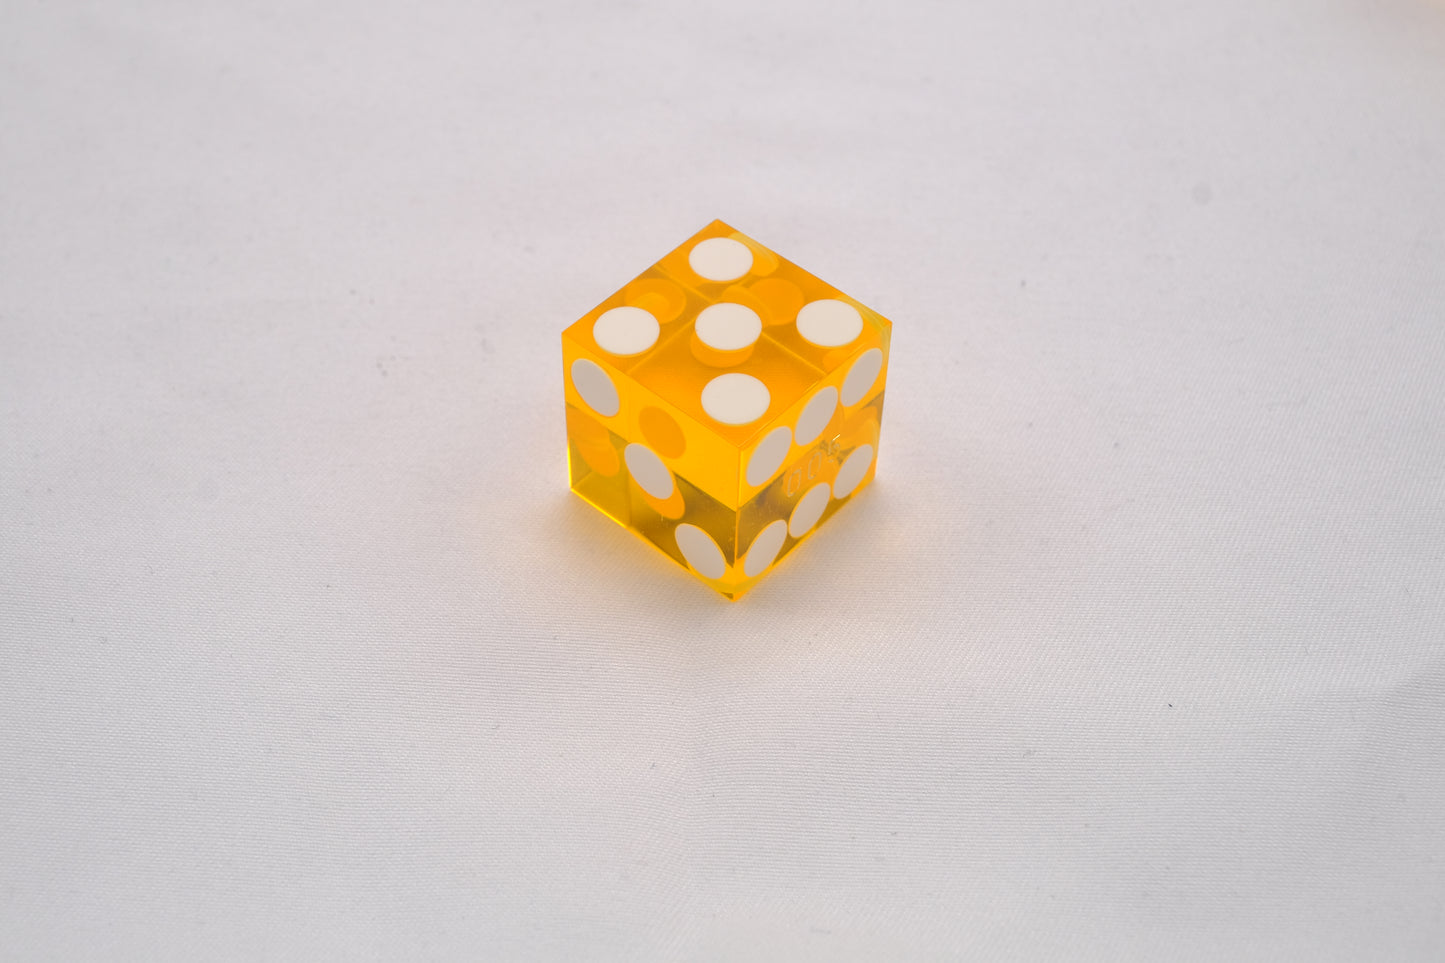 19mm professional SERIALIZED Yellow dice for craps